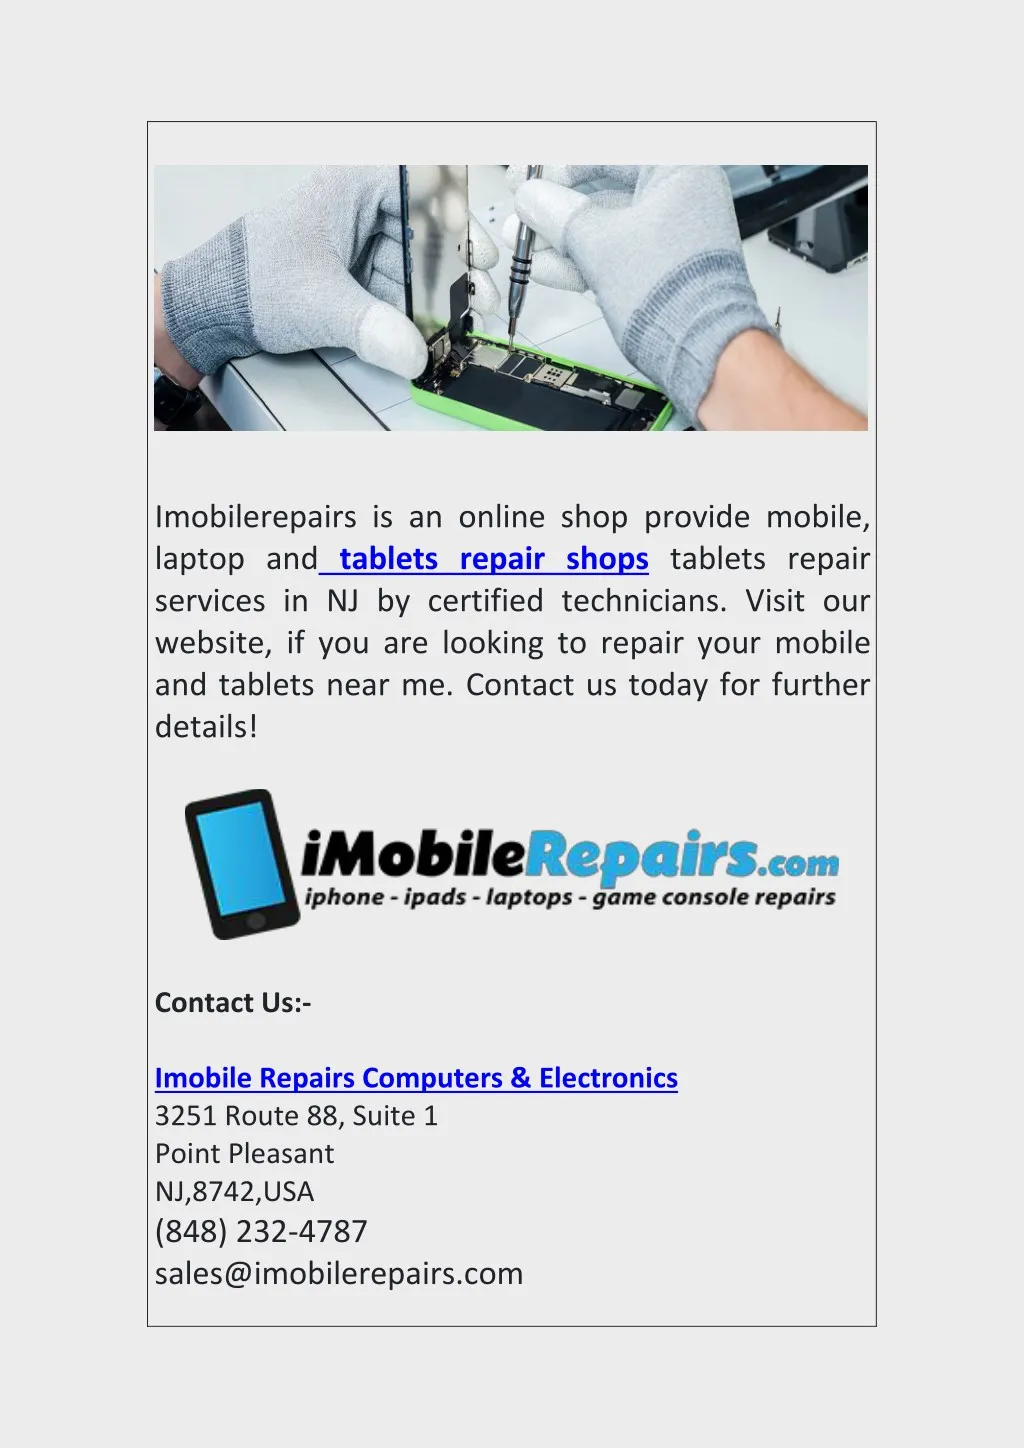 imobilerepairs is an online shop provide mobile